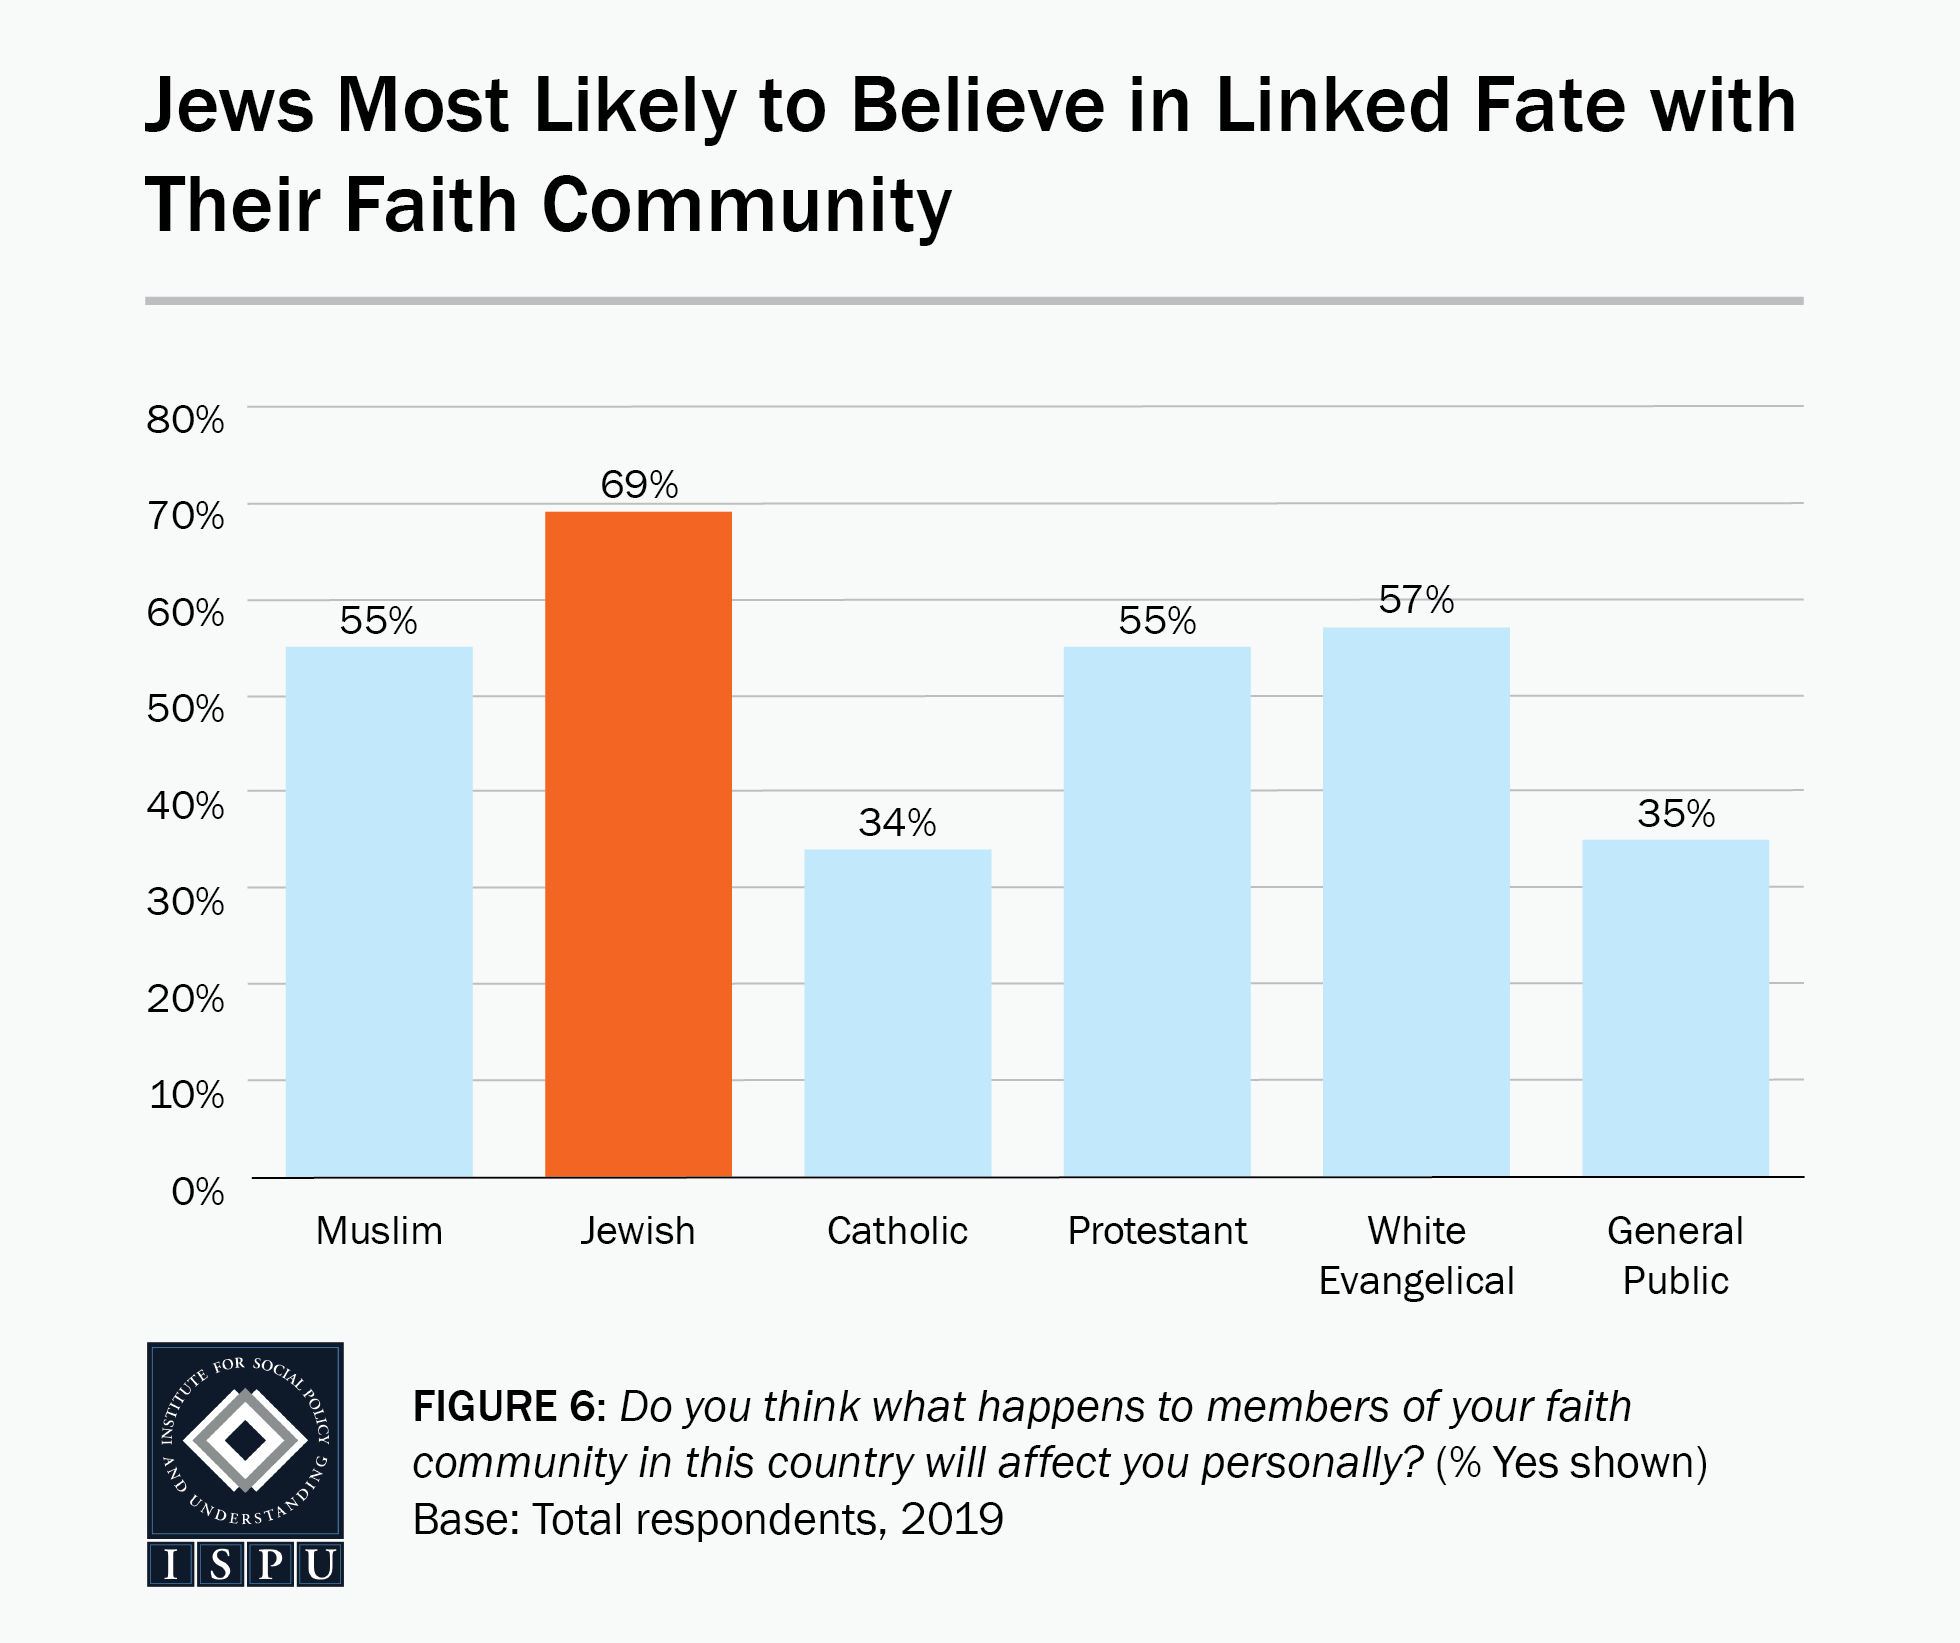 Figure 6: A bar graph showing that Jews (69%) are the most likely faith group to believe in linked fate with their faith community